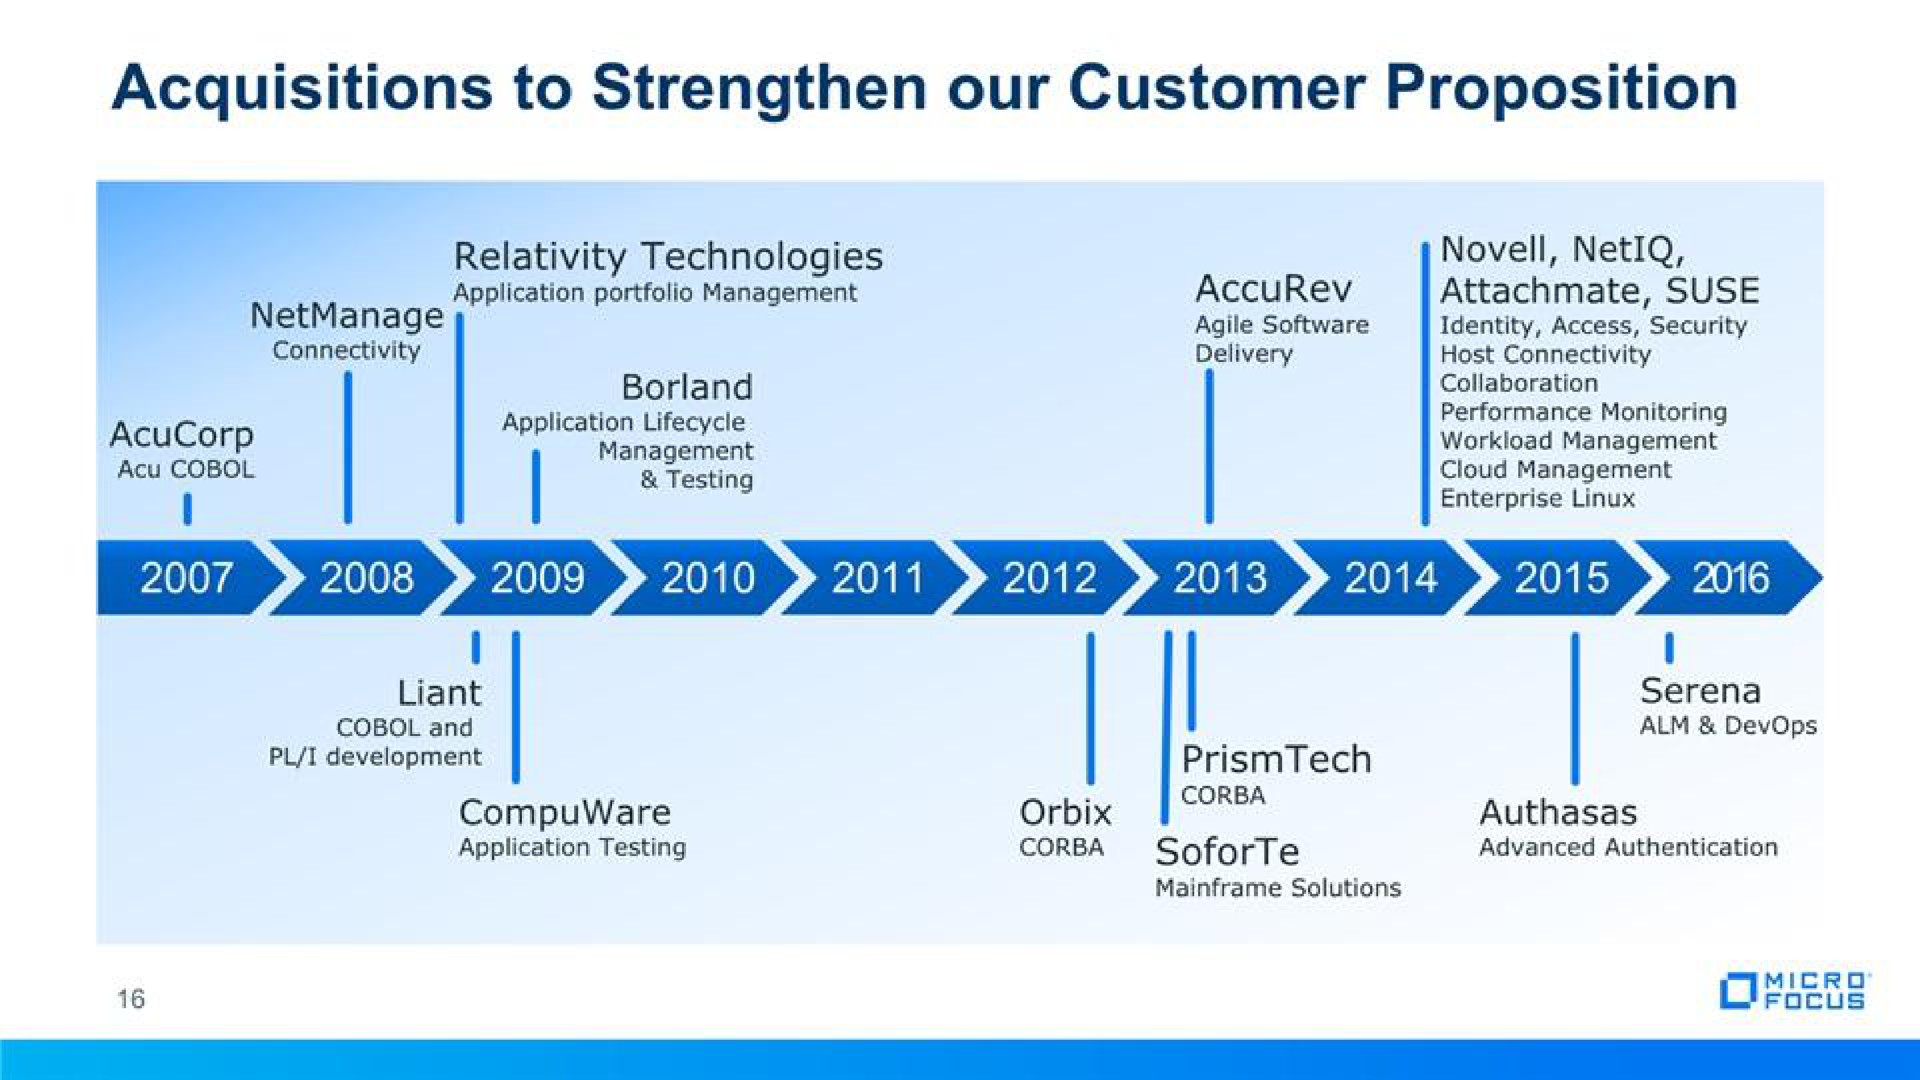 acquisitions to strengthen our customer proposition | Micro Focus